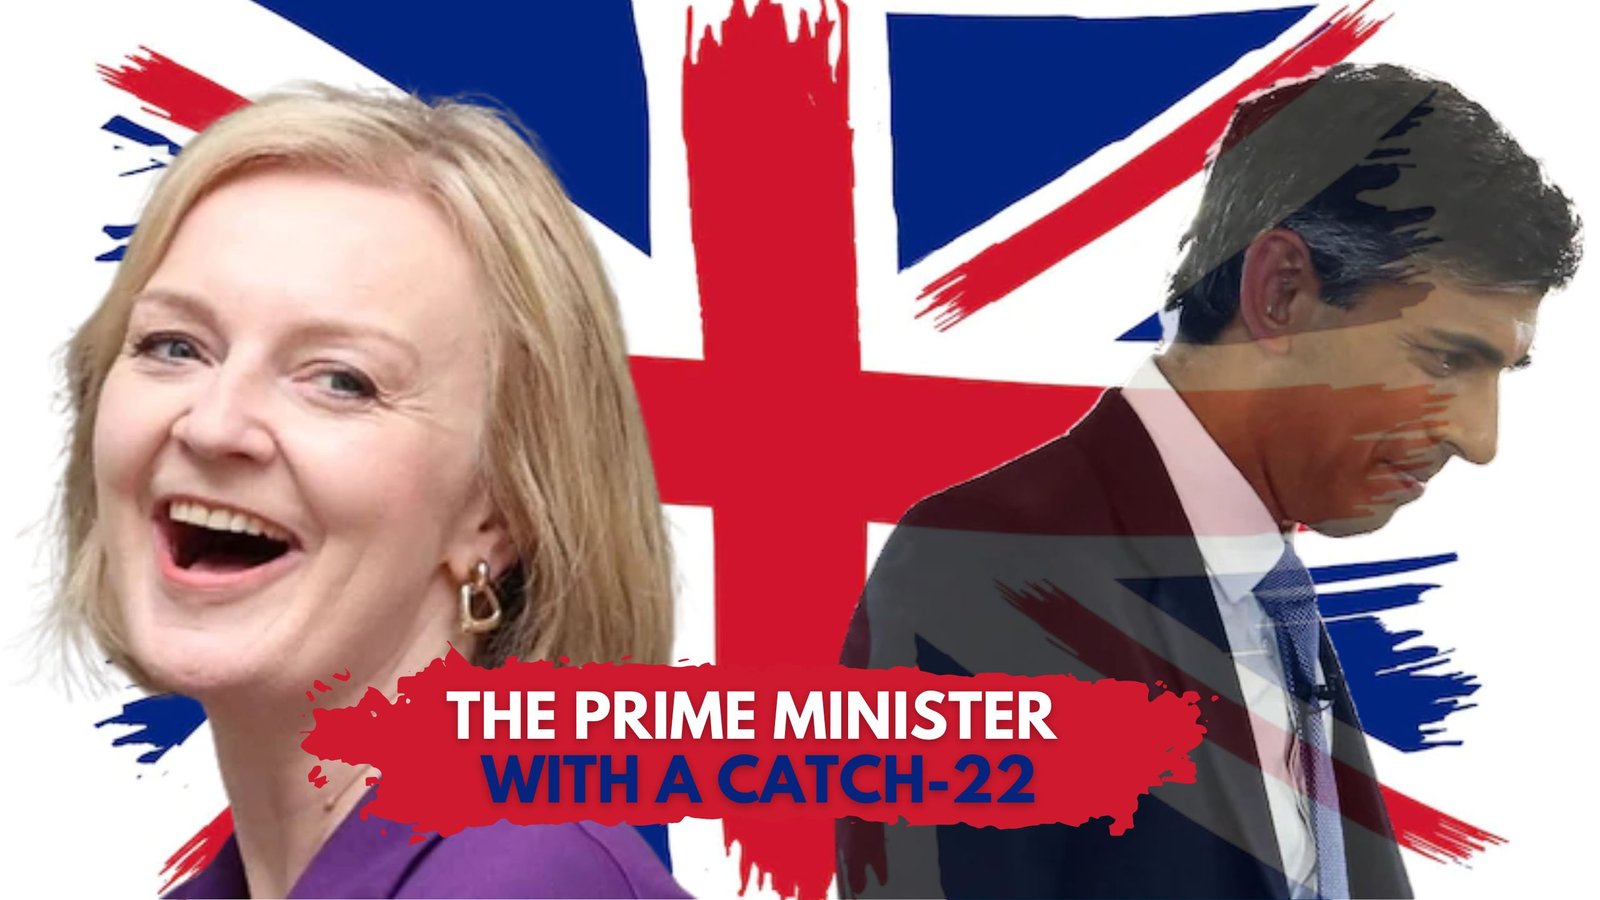 Liz Truss: The Prime Minister with a Catch-22